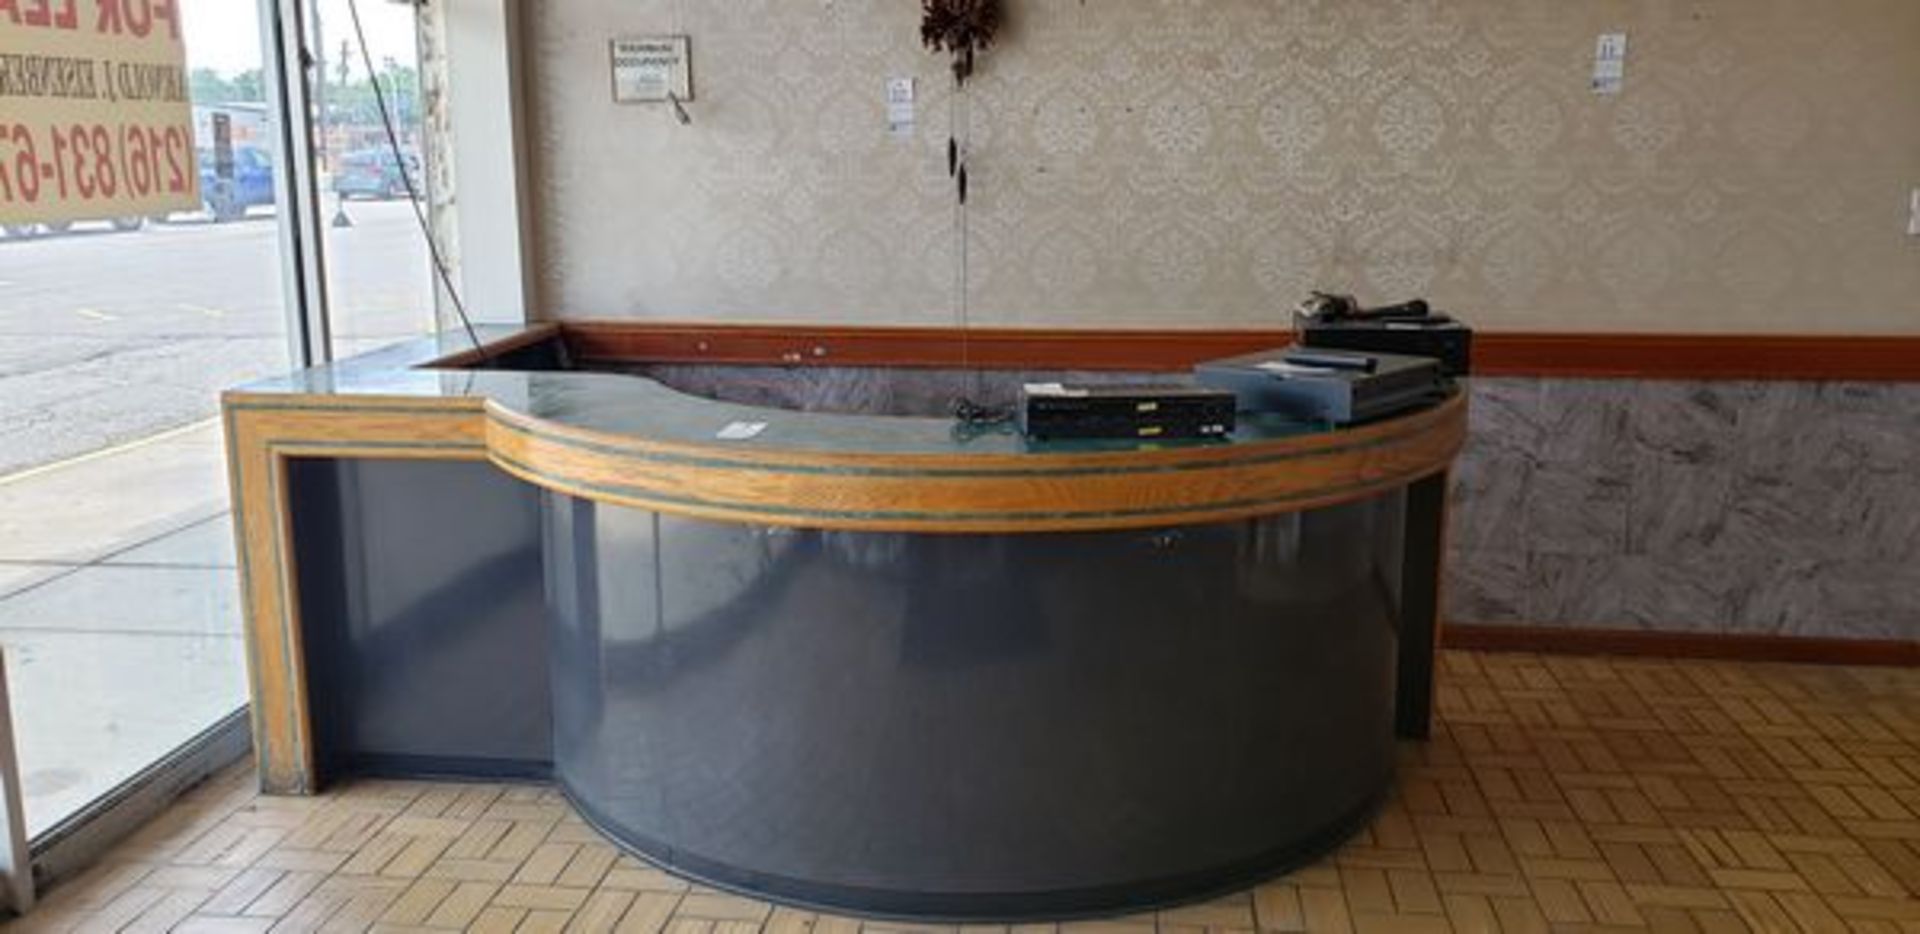 10' X 7'2" RECEPTIONIST COUNTER - L SHAPED WITH ROUND FRONT